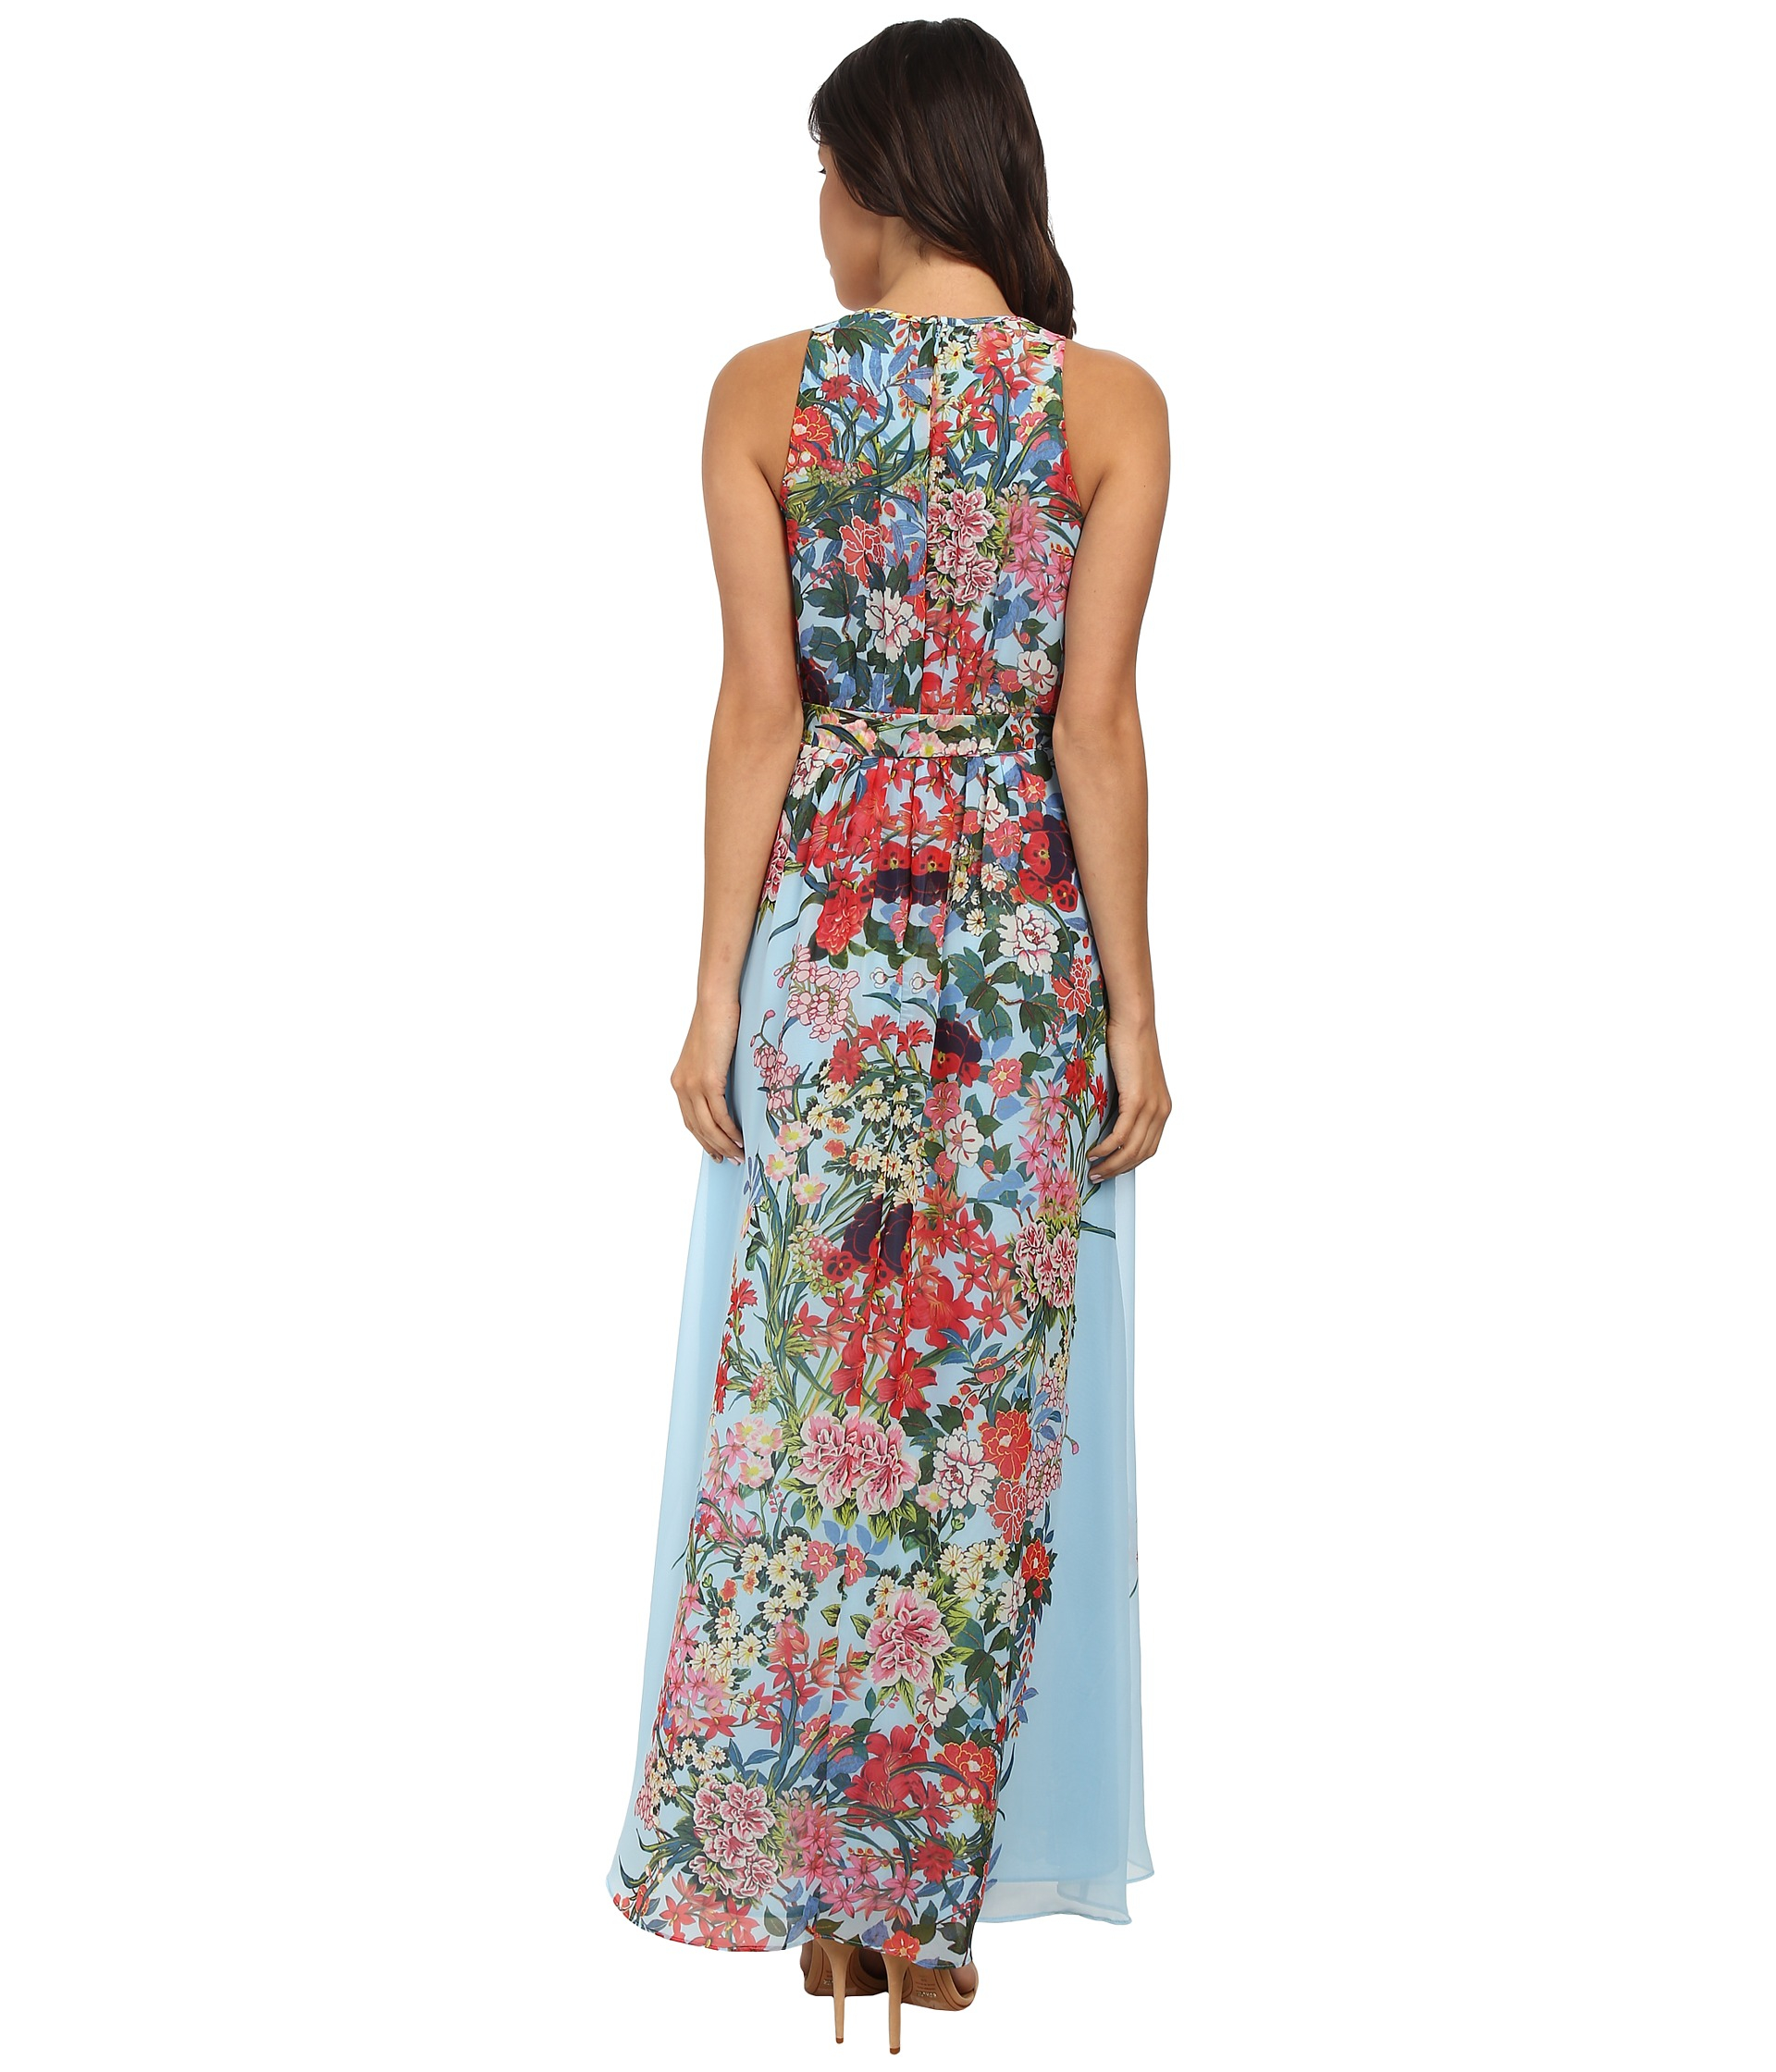 Lyst Adrianna Papell Printed Multi Floral Halter Long Maxi Dress In Blue 